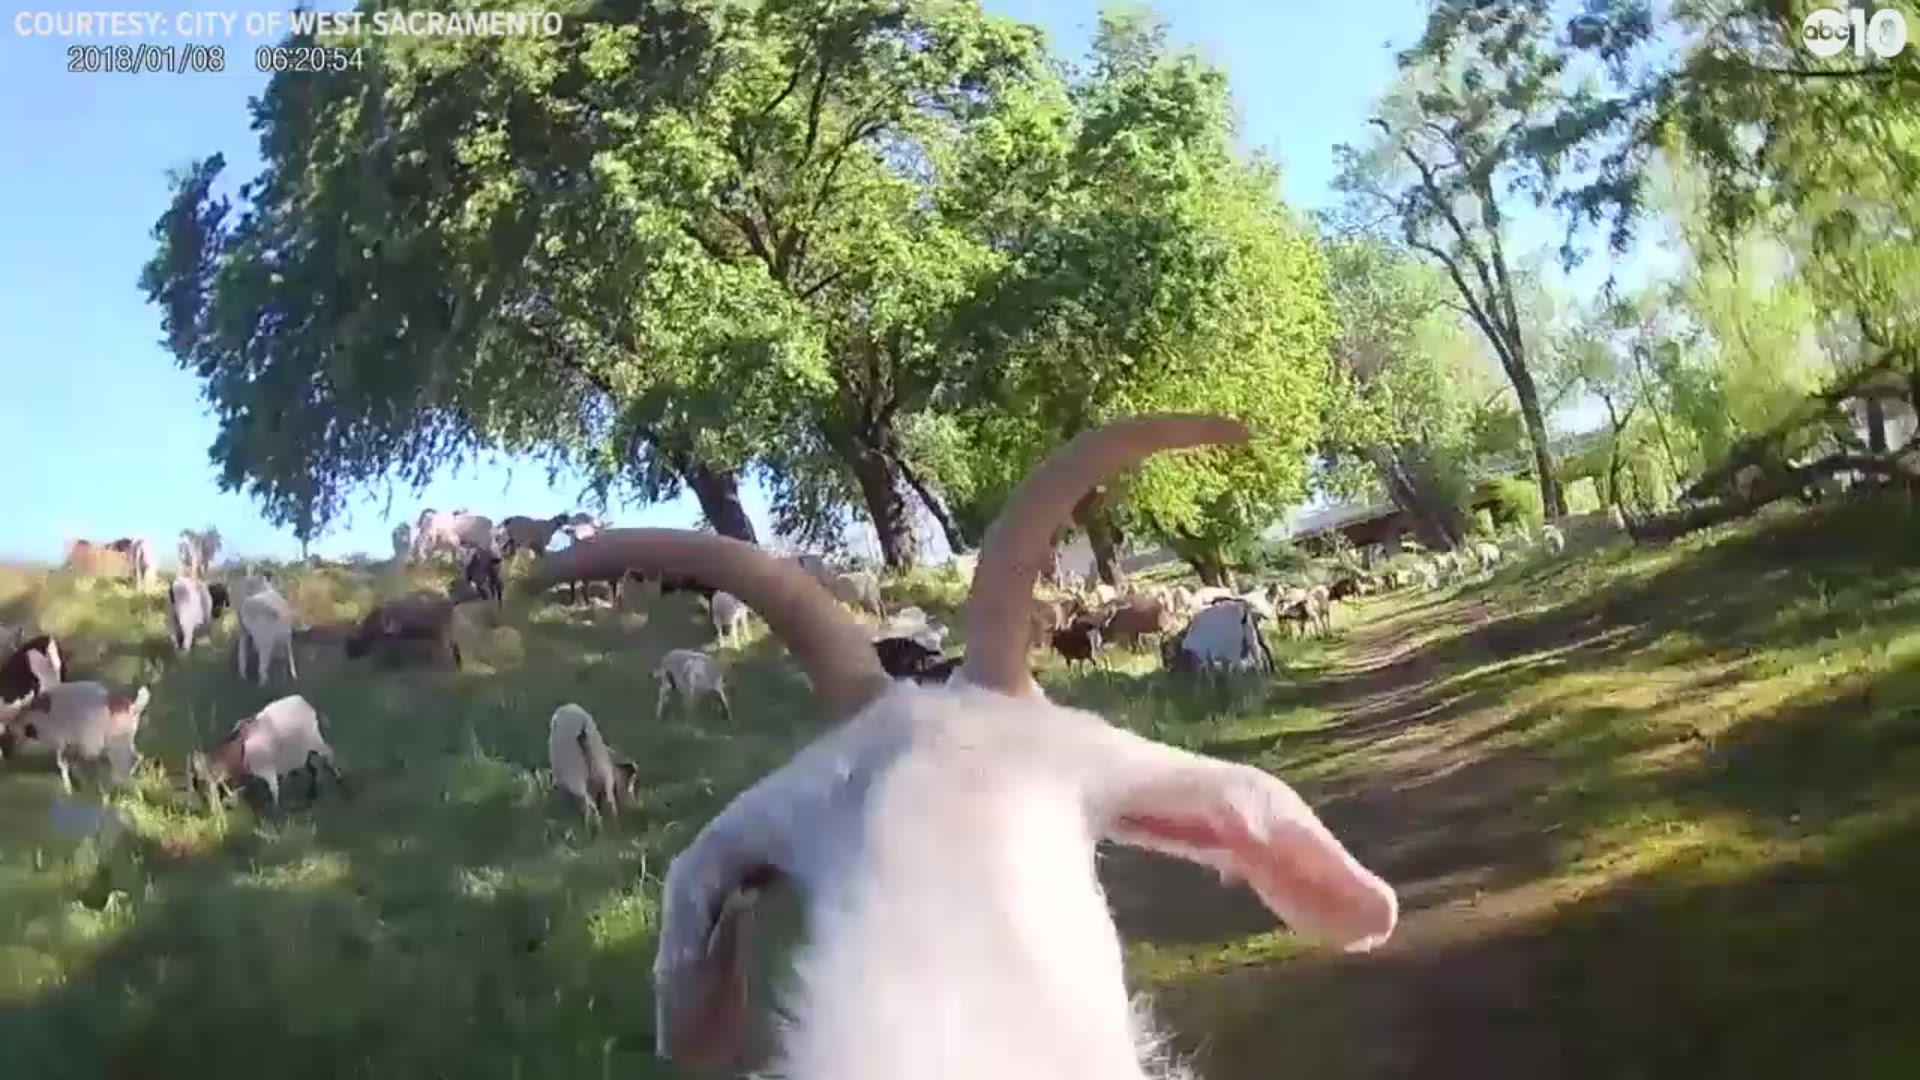 Fire suppression has never looked so cute. The West Sacramento Goat Cam shows what life is like for the goats who help clean up the growing brush around the city.